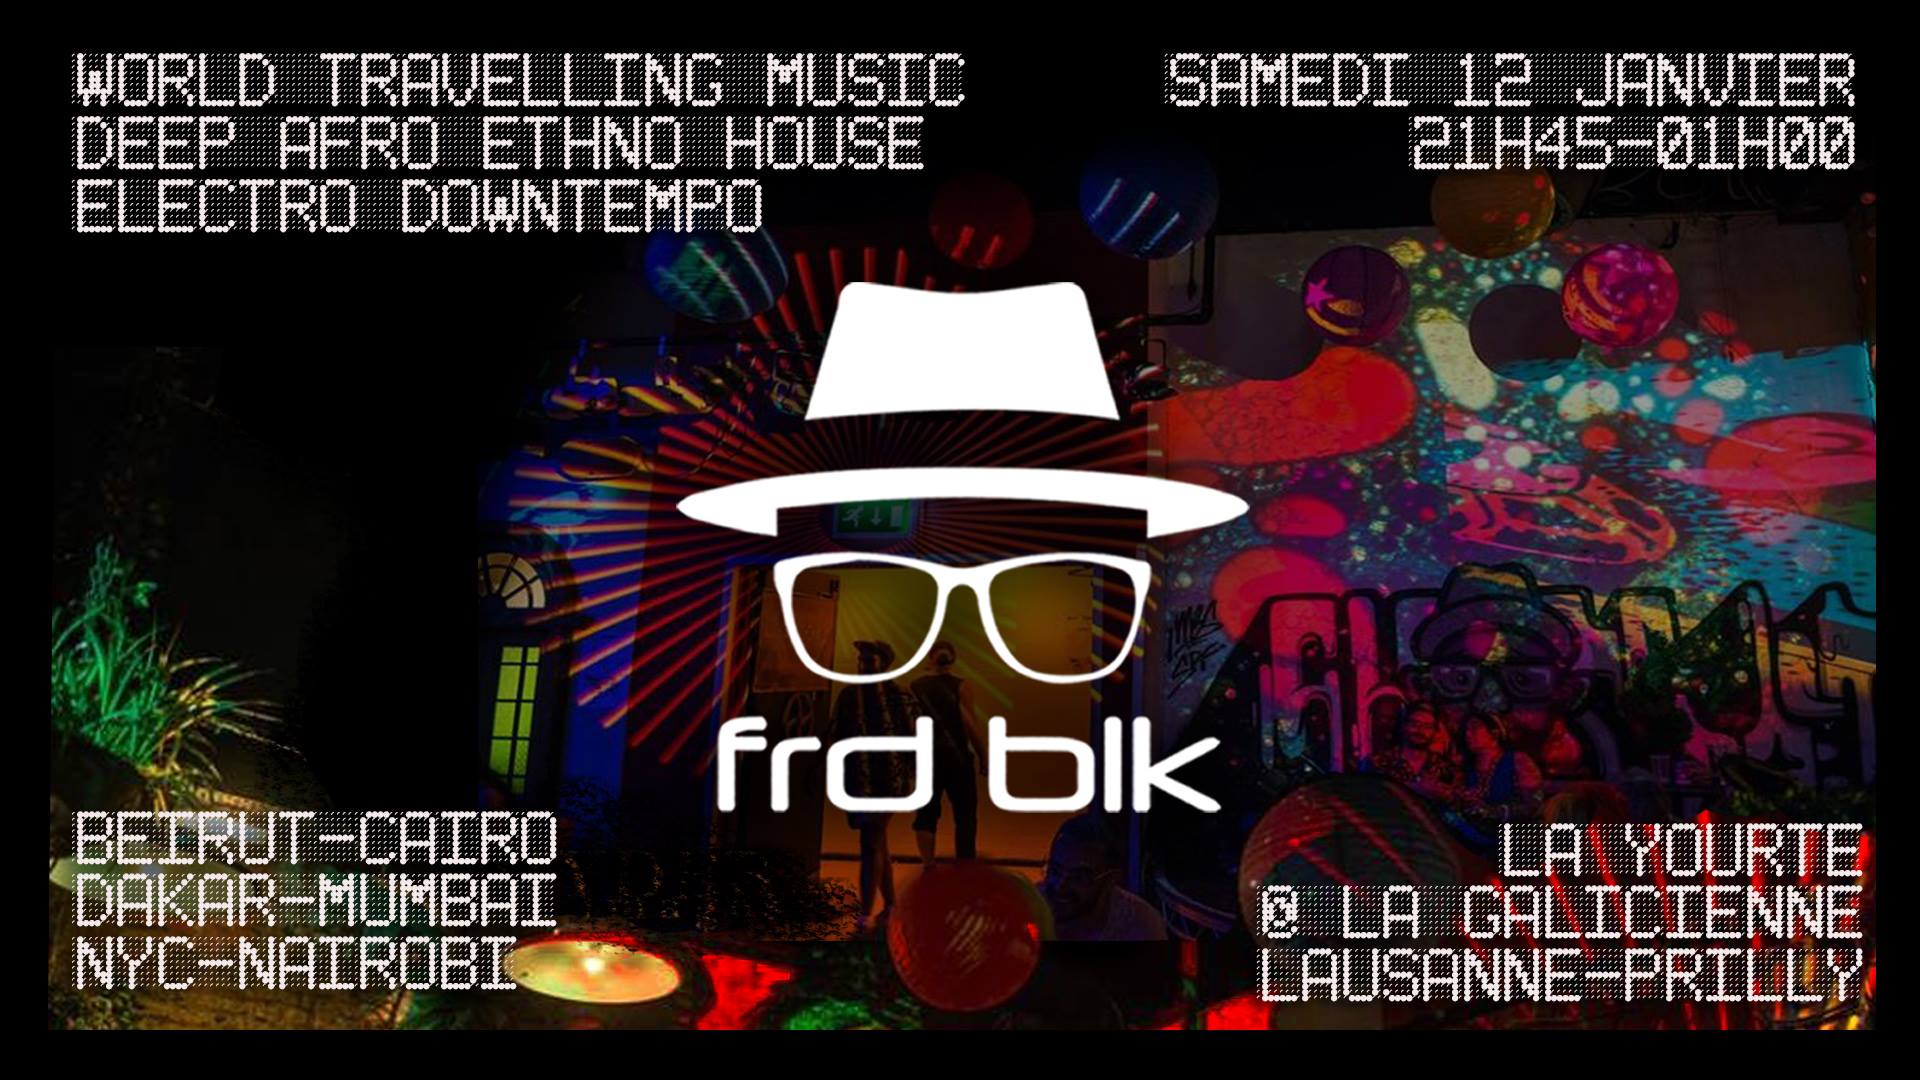 FRD BLK - world music electro downtempo